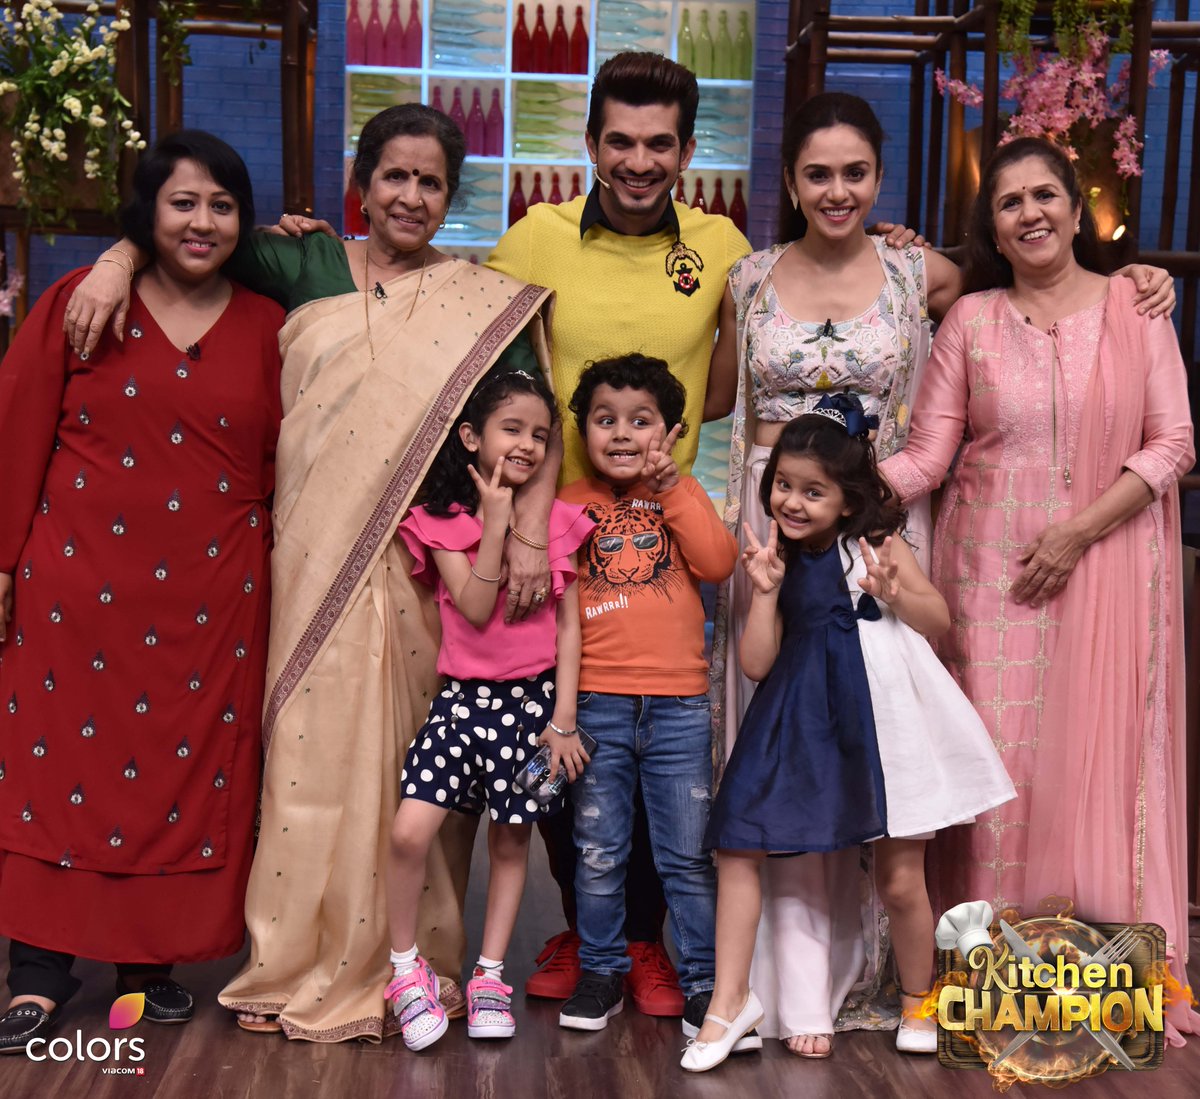 All smiles in the kitchen! Watch Usha tai and @AmrutaOfficial cook it off against each other on #KitchenCHampion today at 1:30 PM. @Thearjunbijlani